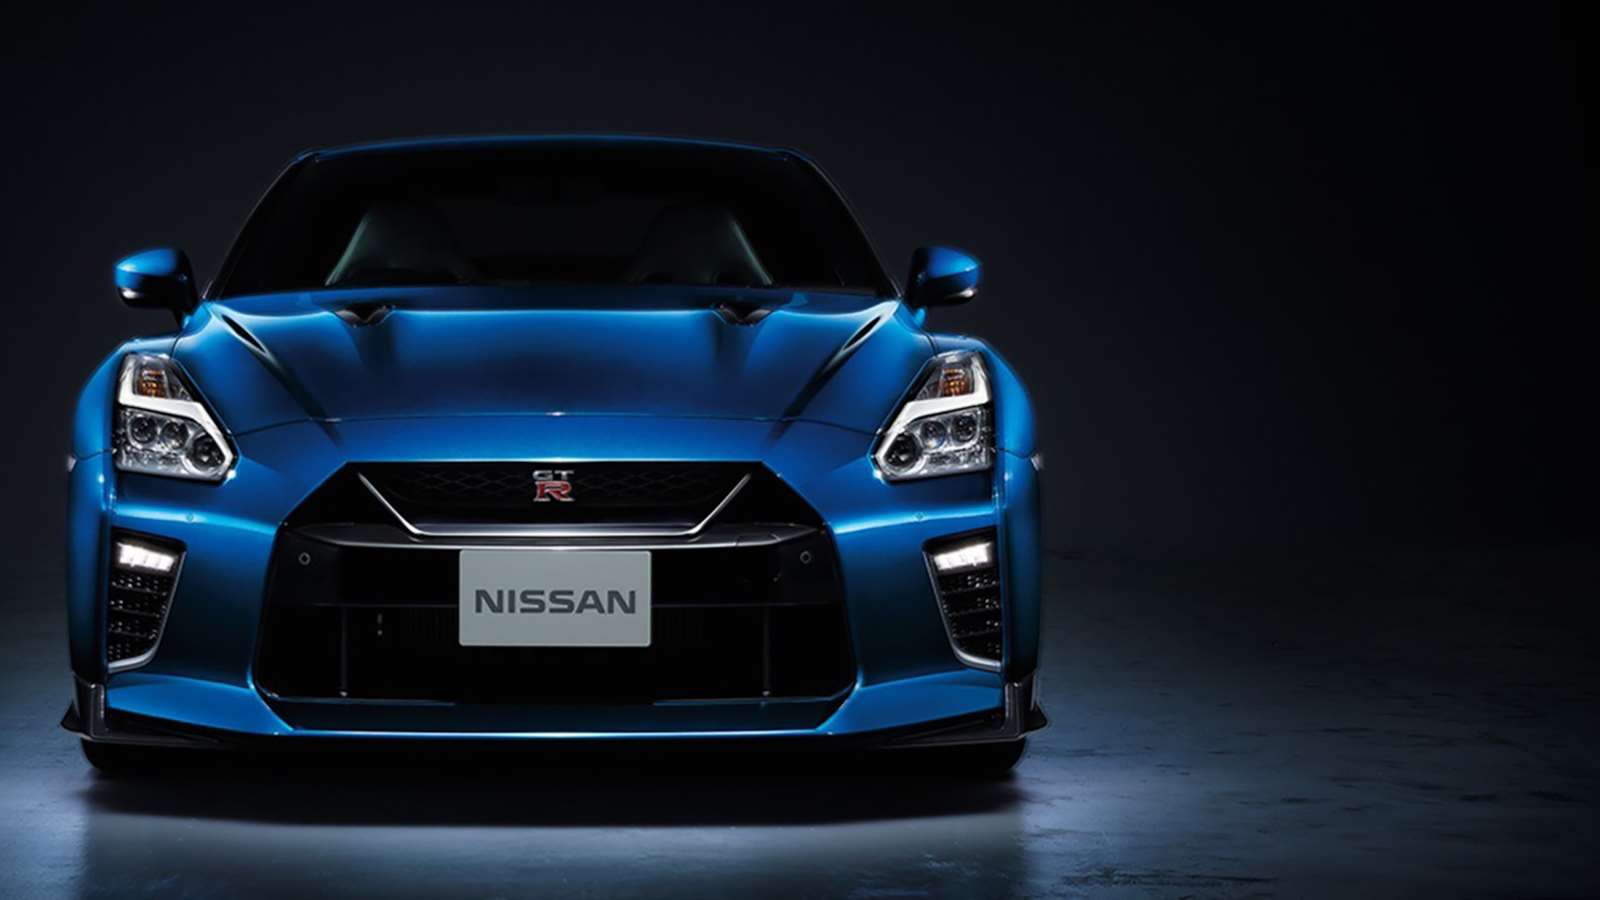 Godzilla Lives On With The 2020 Nissan GT R